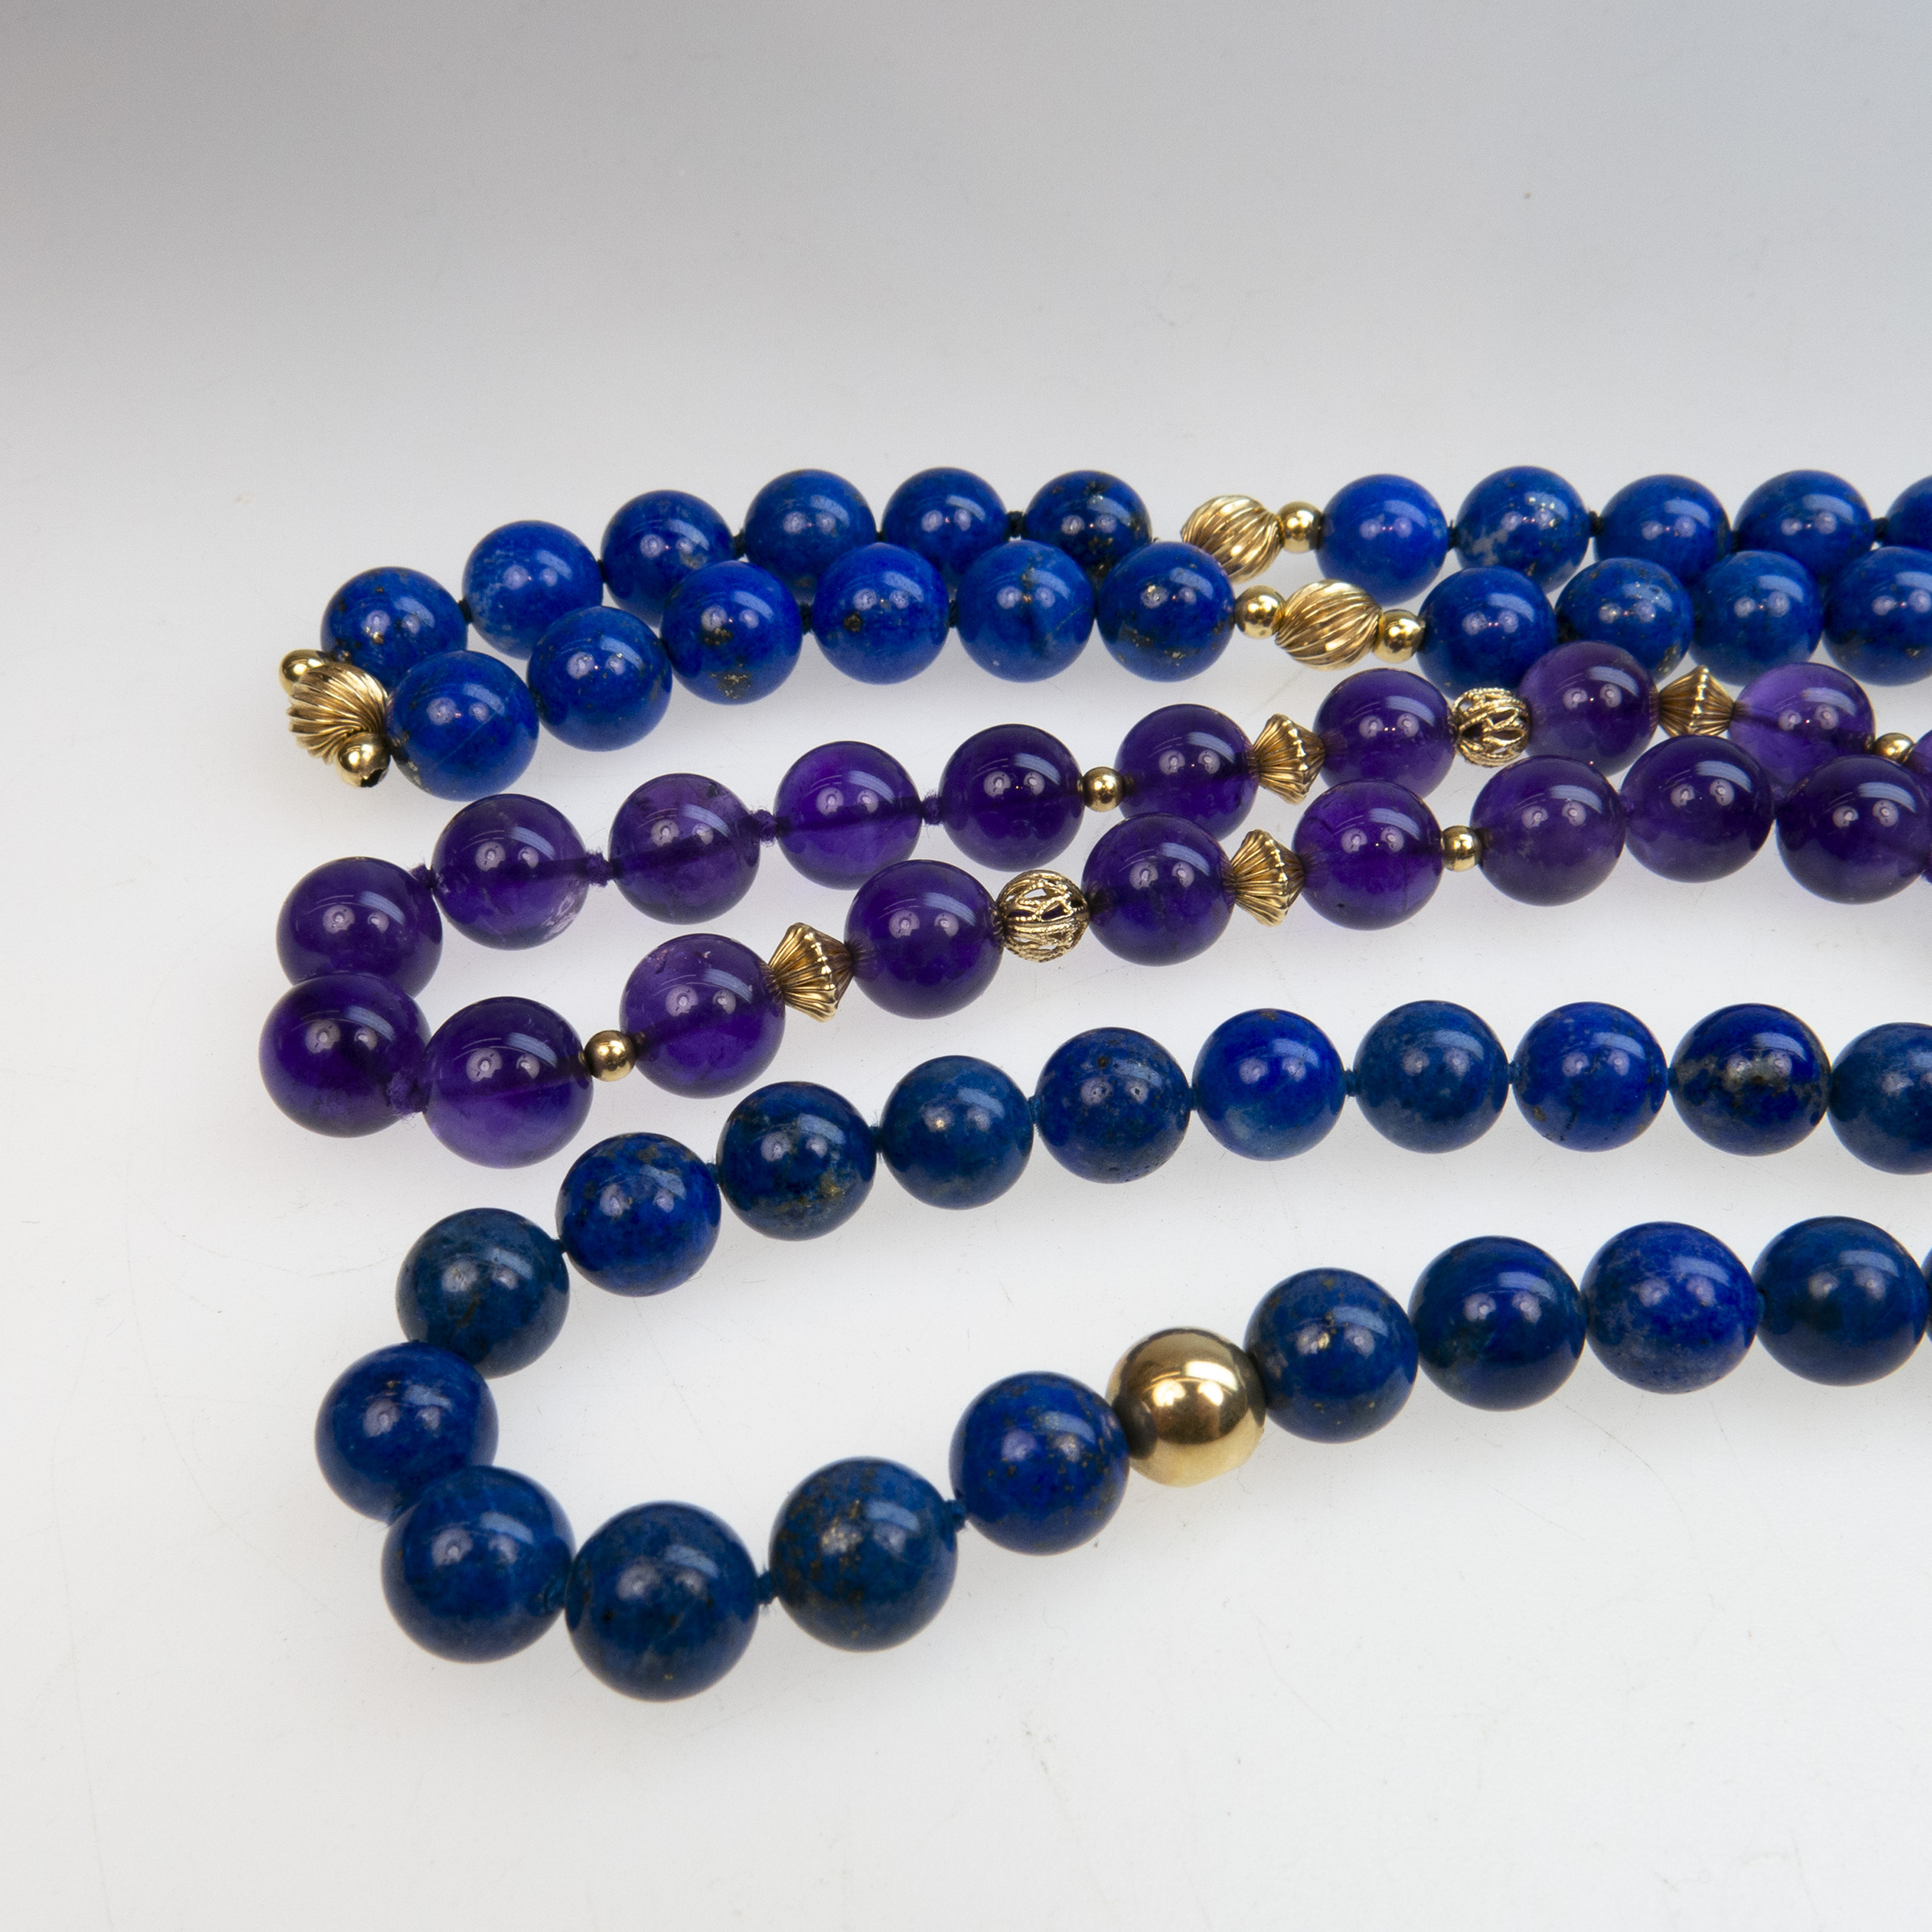 One Amethyst and Two Lapis Bead Necklaces